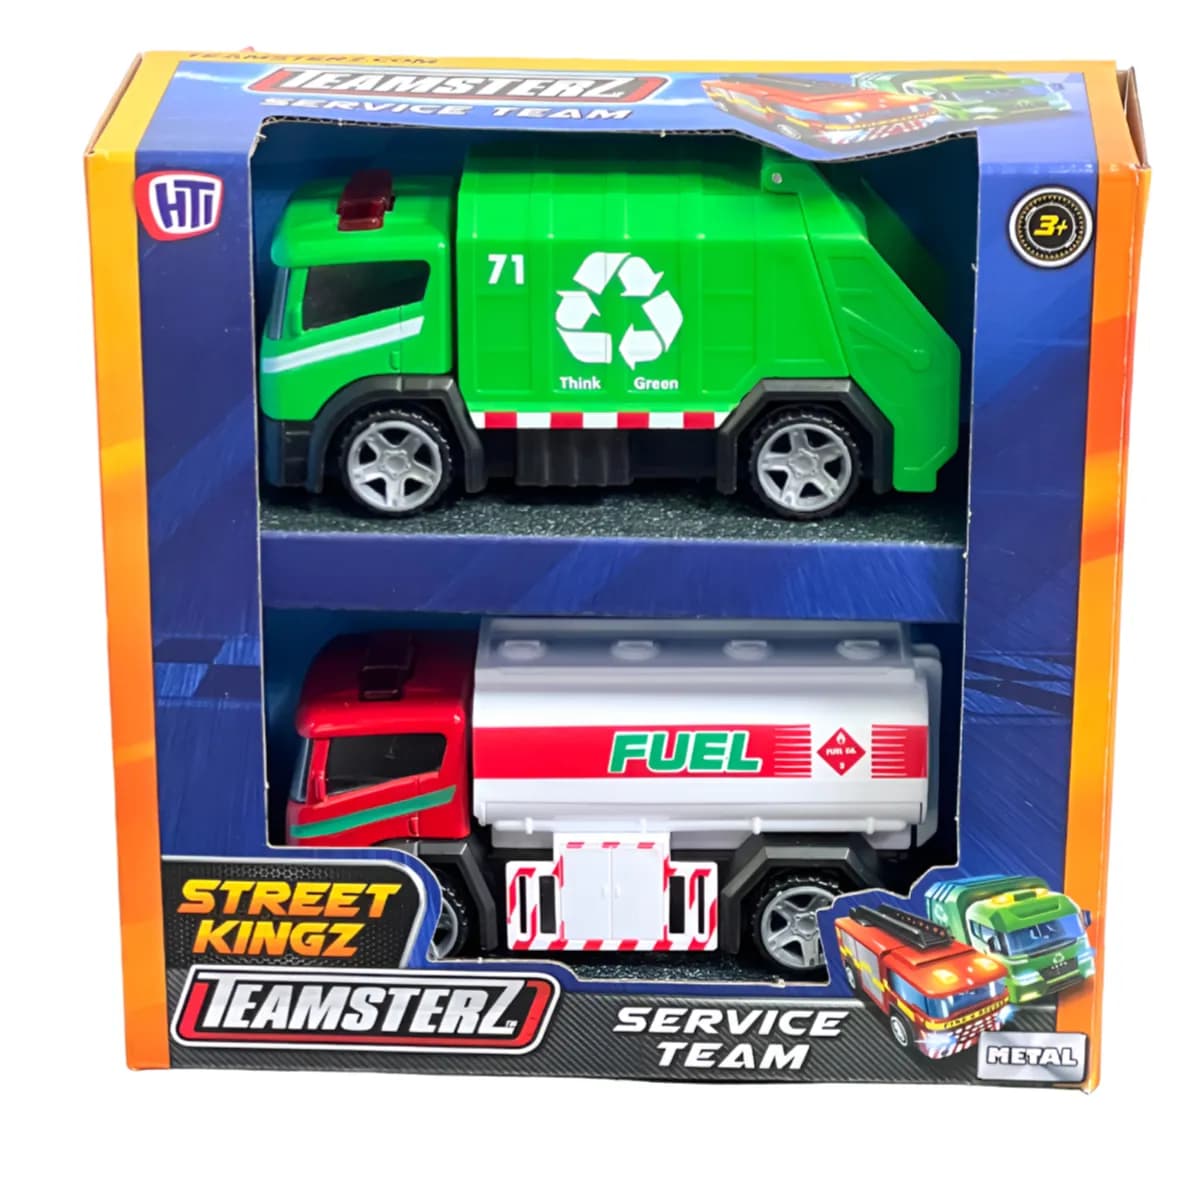 Teamsterz Street Kingz Service Team Vehicle Play Set For Kids - Pack Of  2  (VLLT25)